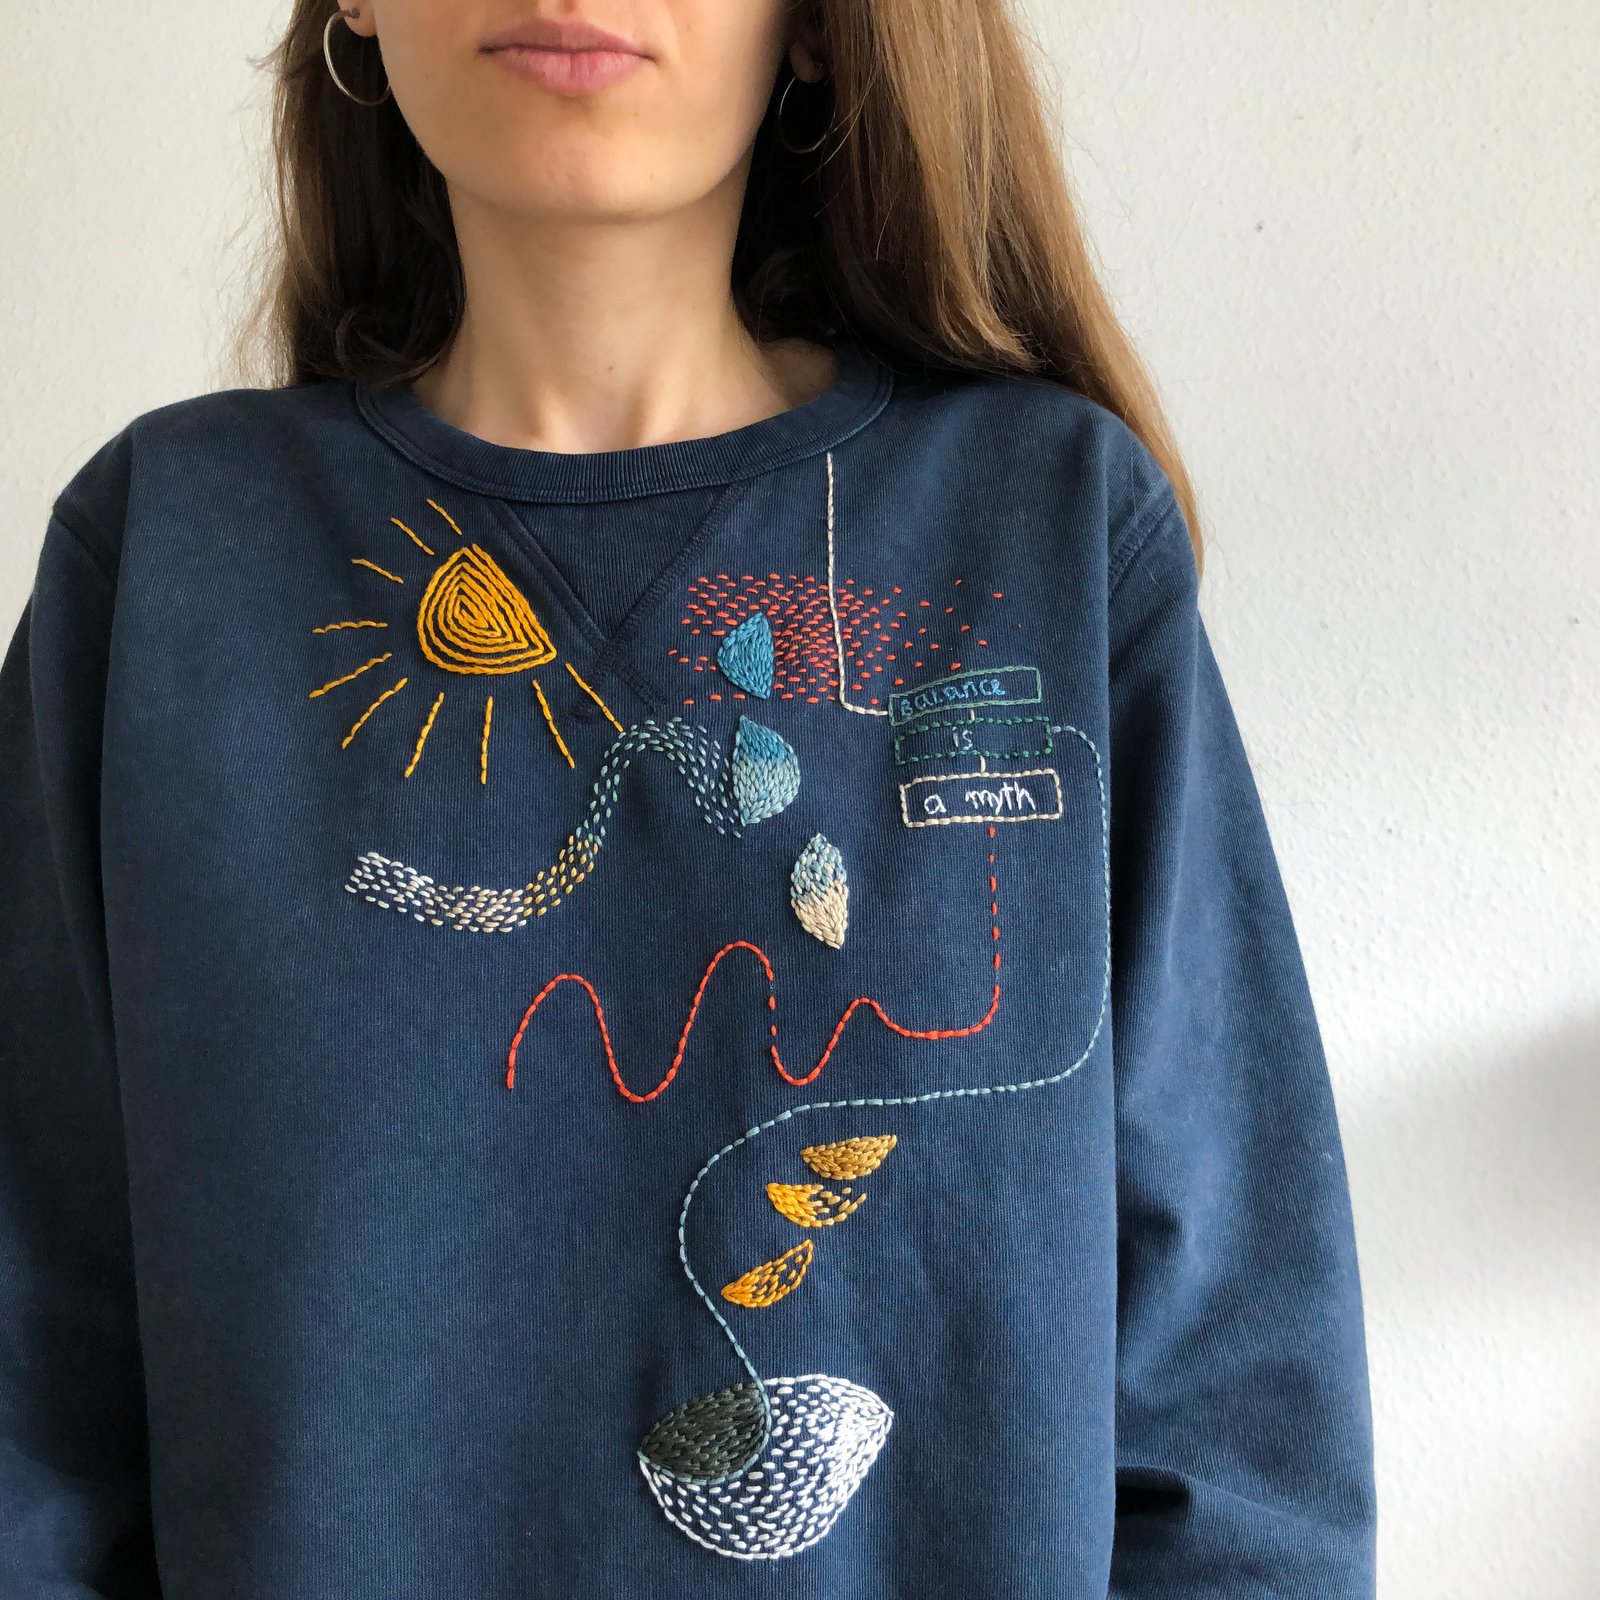 with hand embroidered details Moods art Hand painted pullover Clothing Gender-Neutral Adult Clothing Hoodies & Sweatshirts Sweatshirts 